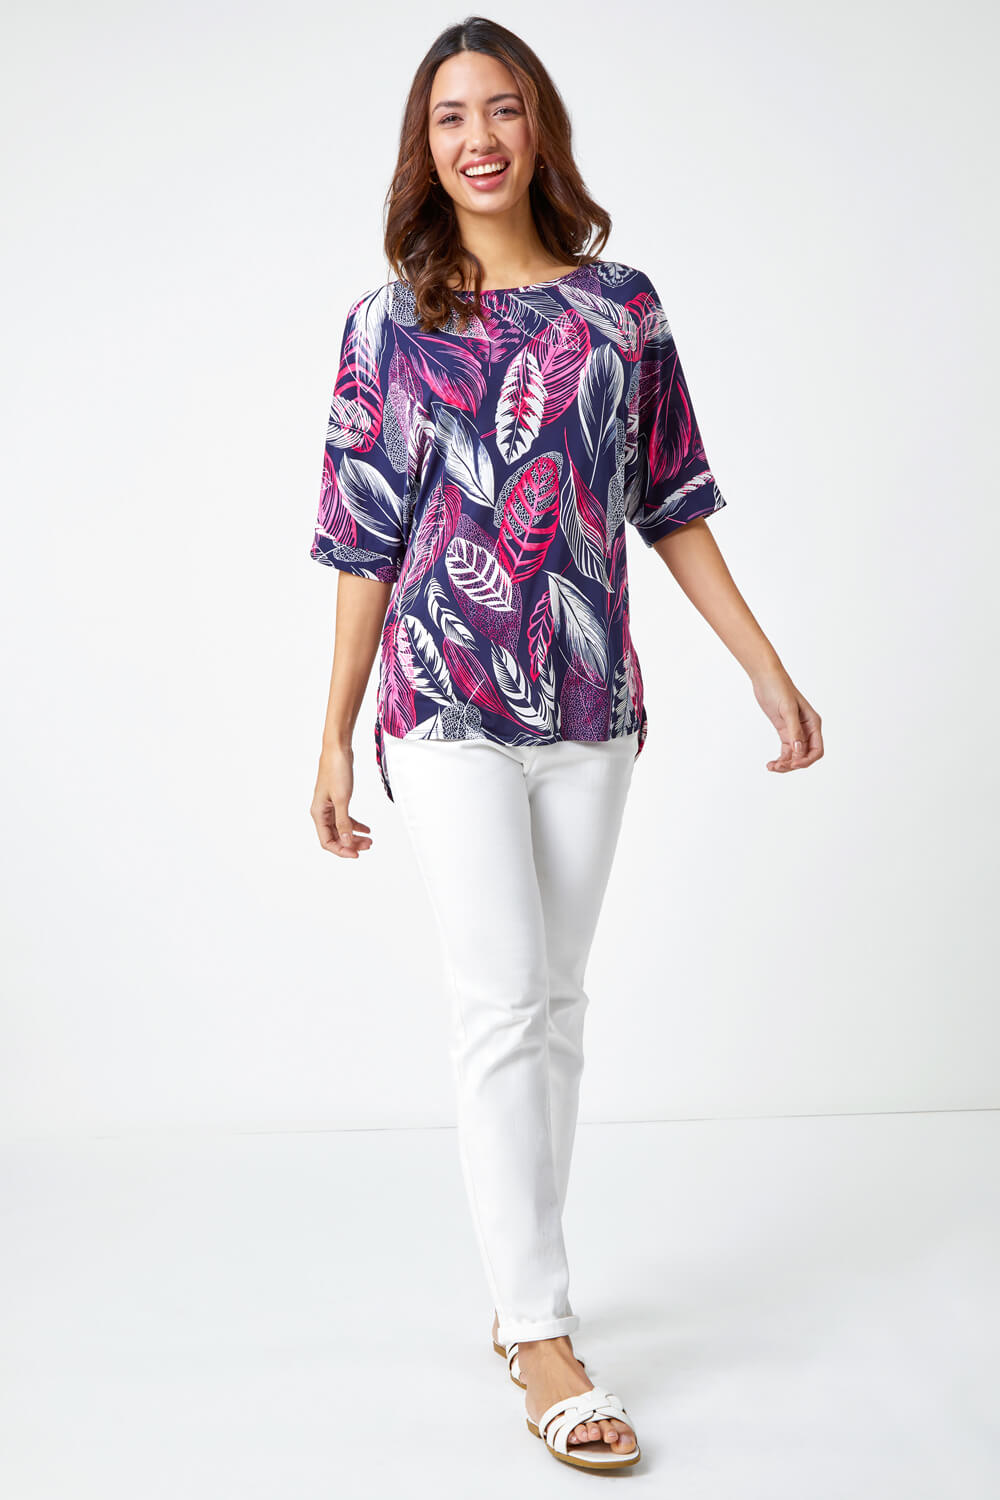 PINK Leaf Print Textured Tunic Top, Image 4 of 5